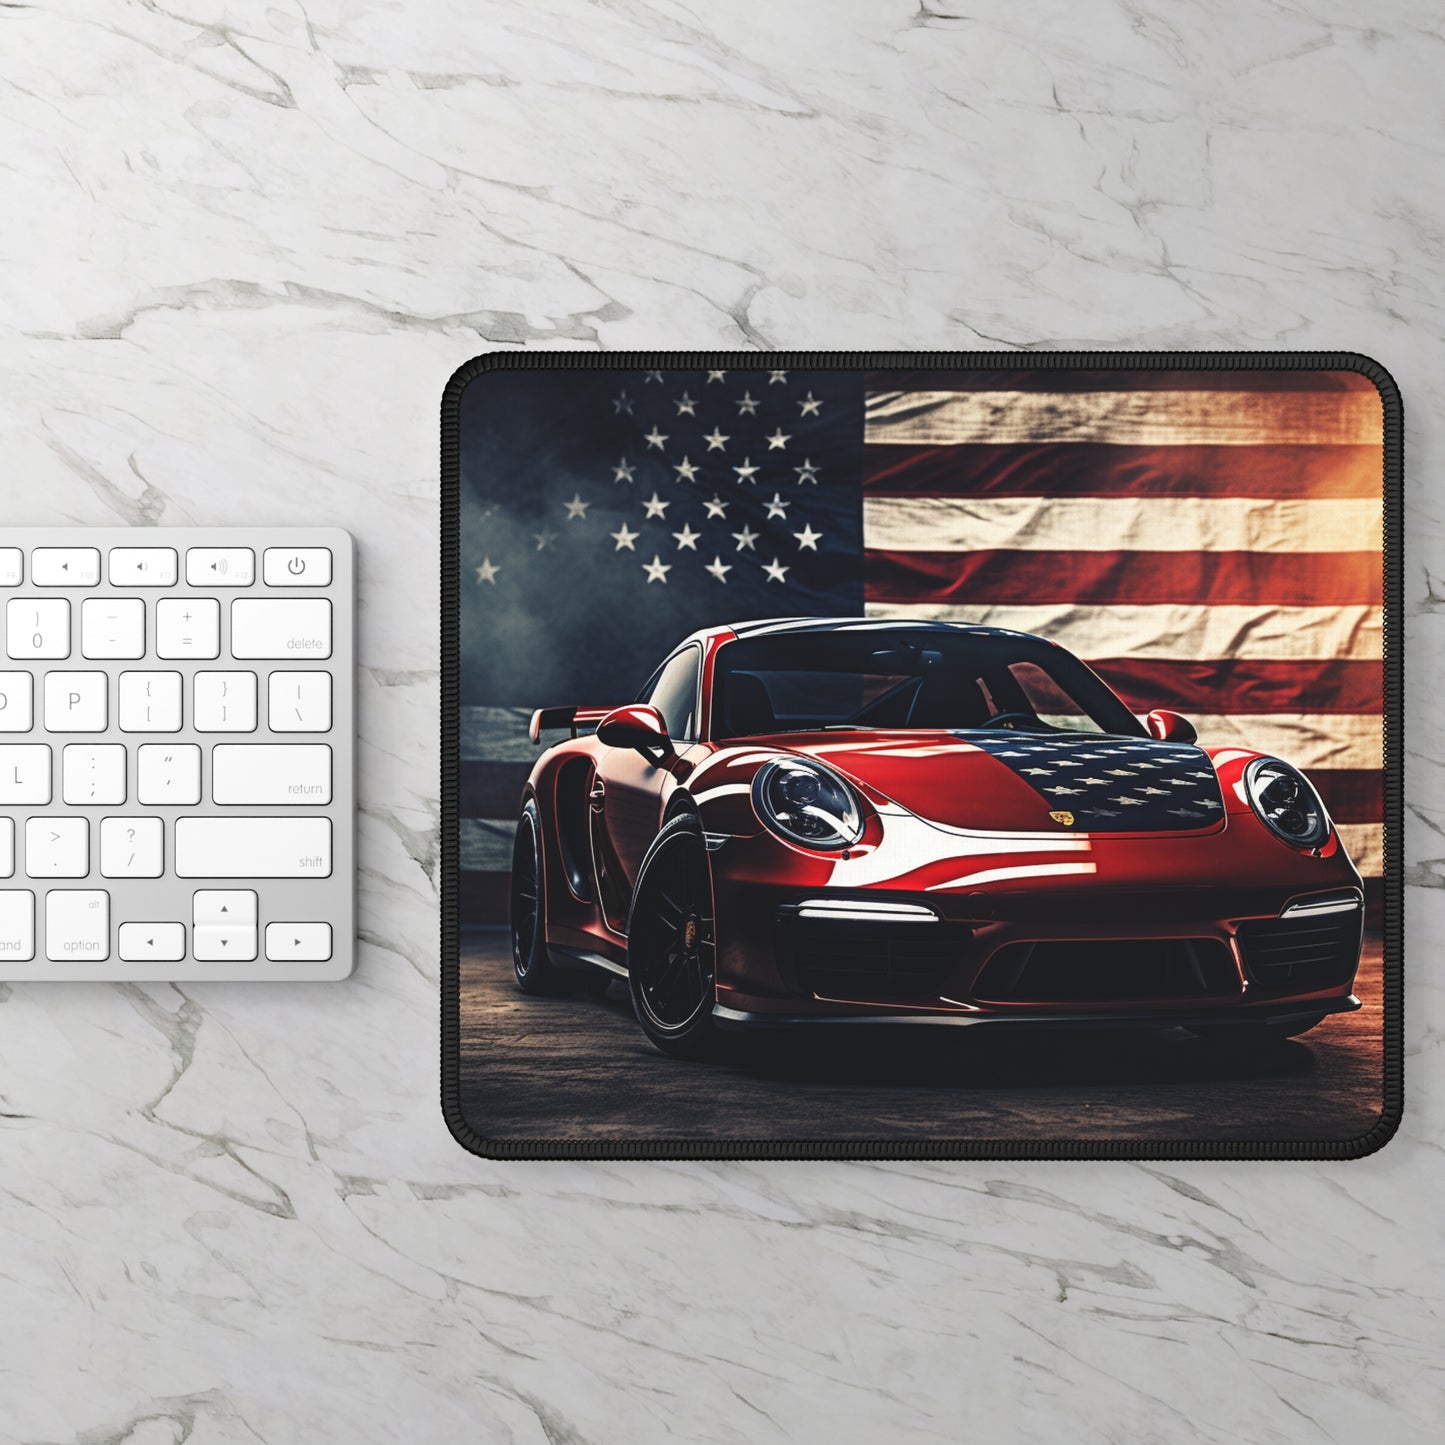 Gaming Mouse Pad  American Flag Background Porsche 2